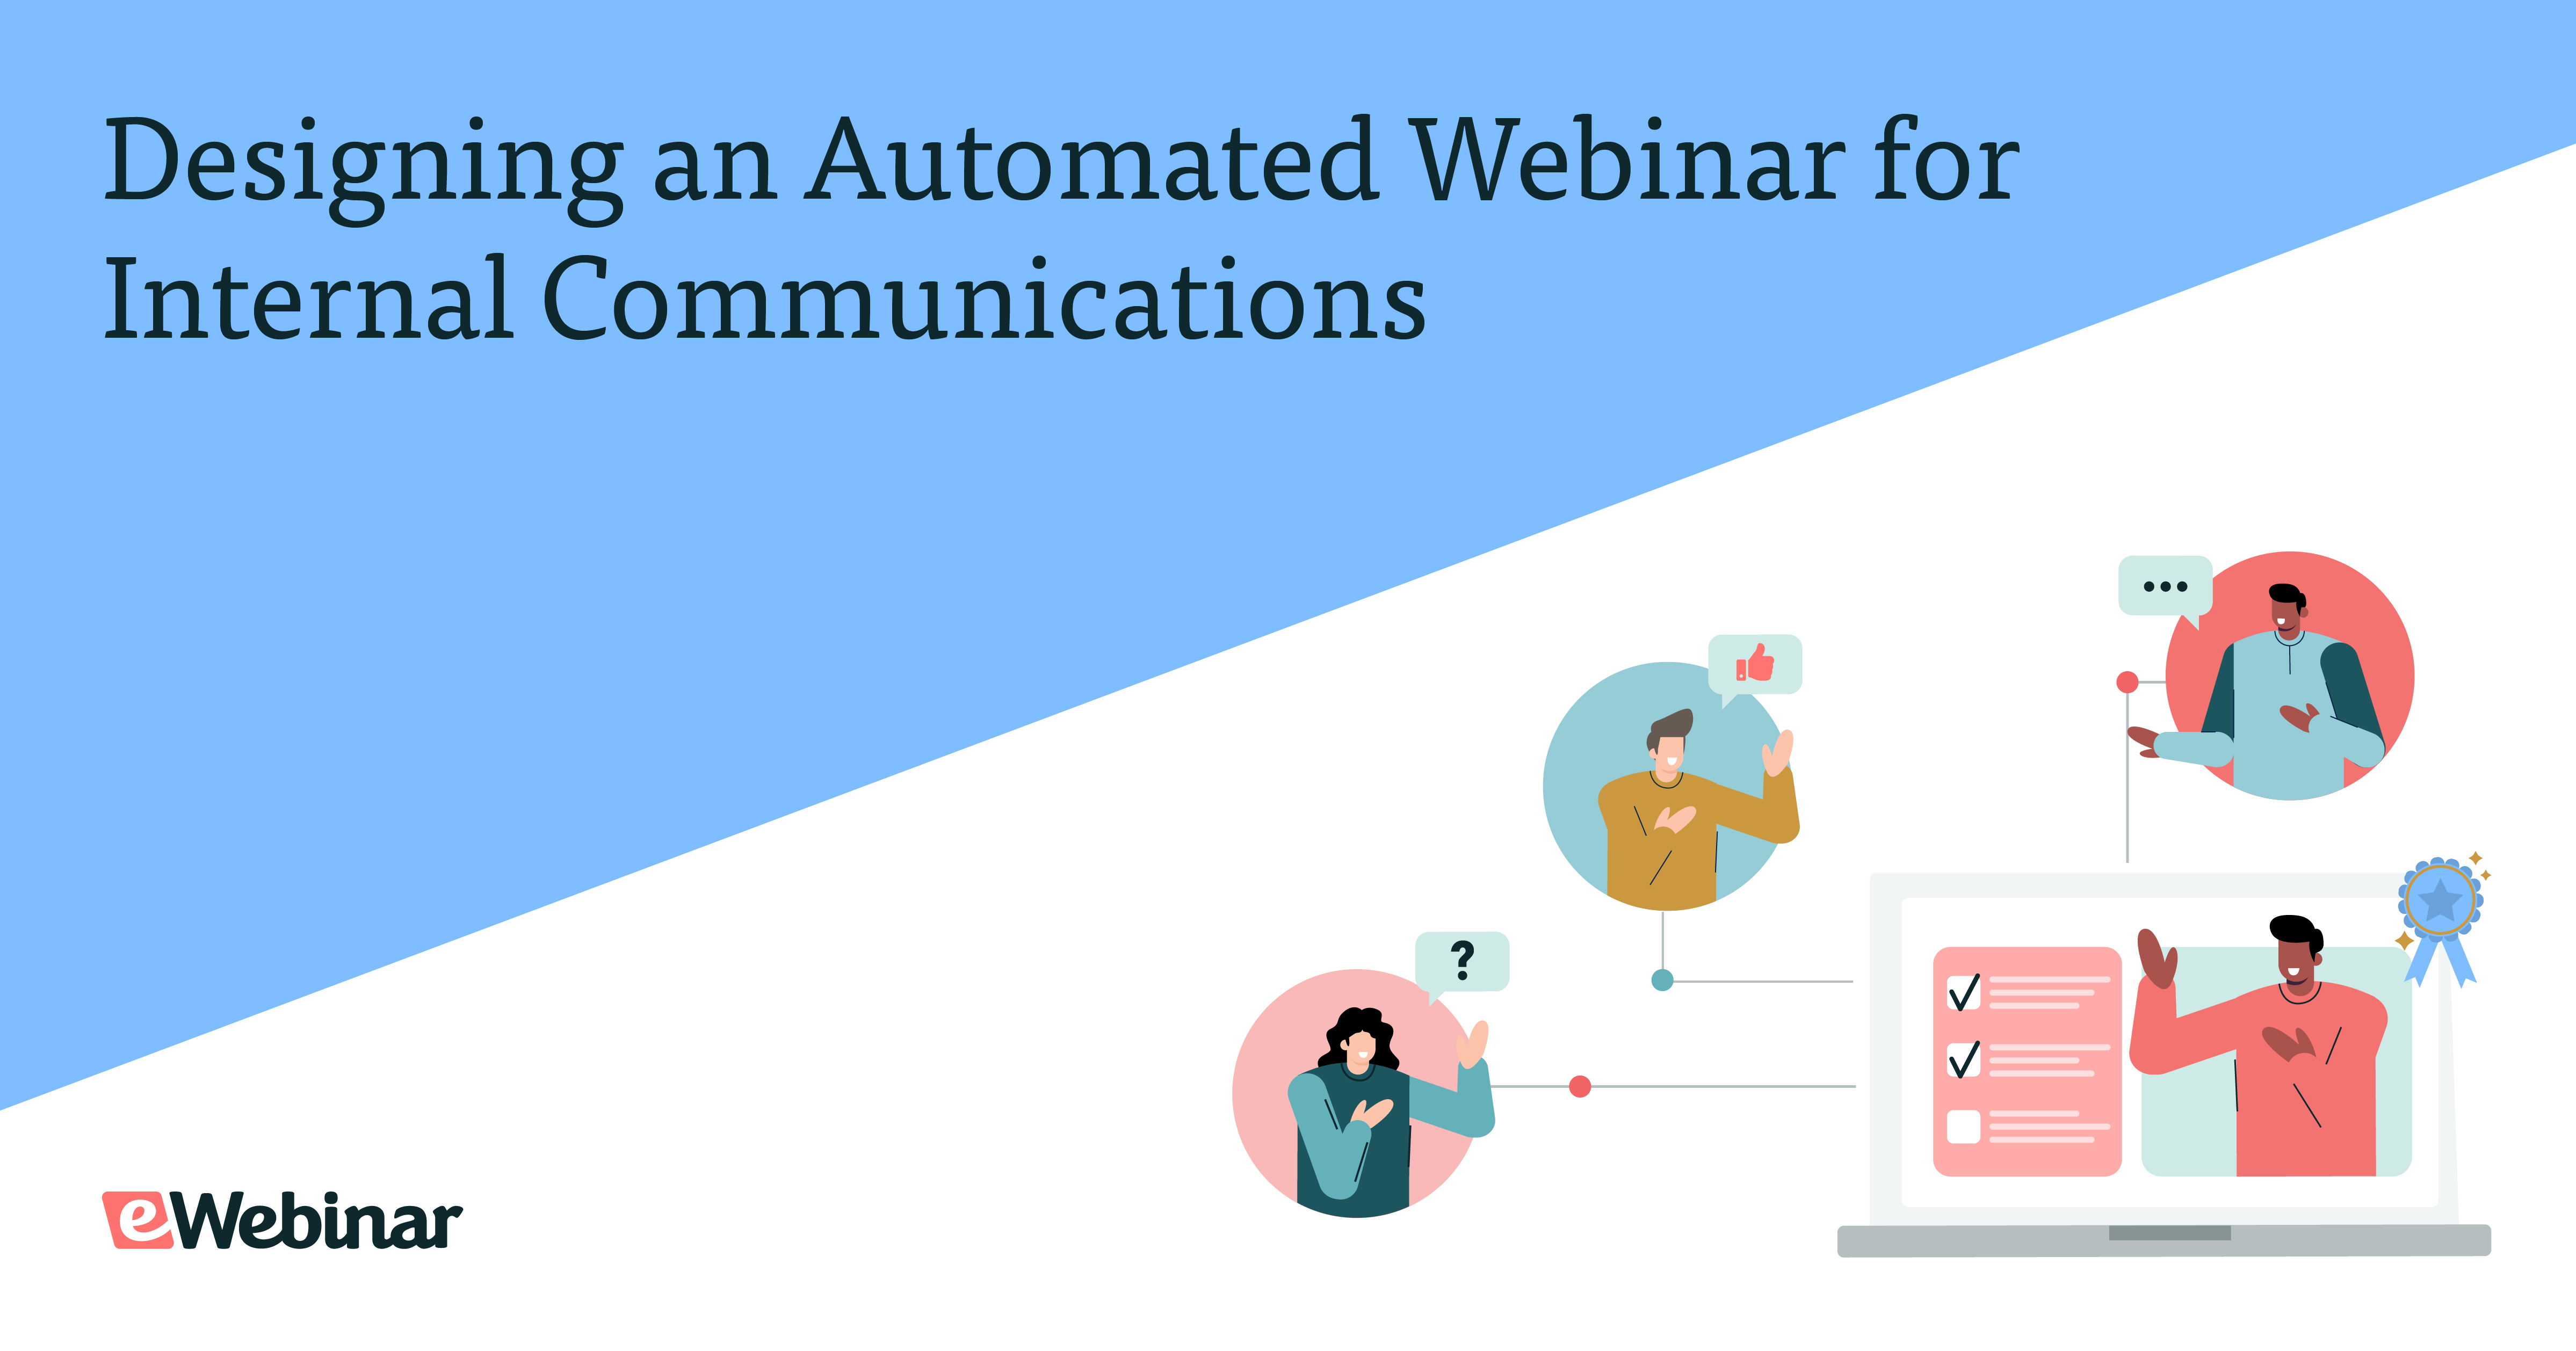 Designing an Automated Webinar for Internal Communications